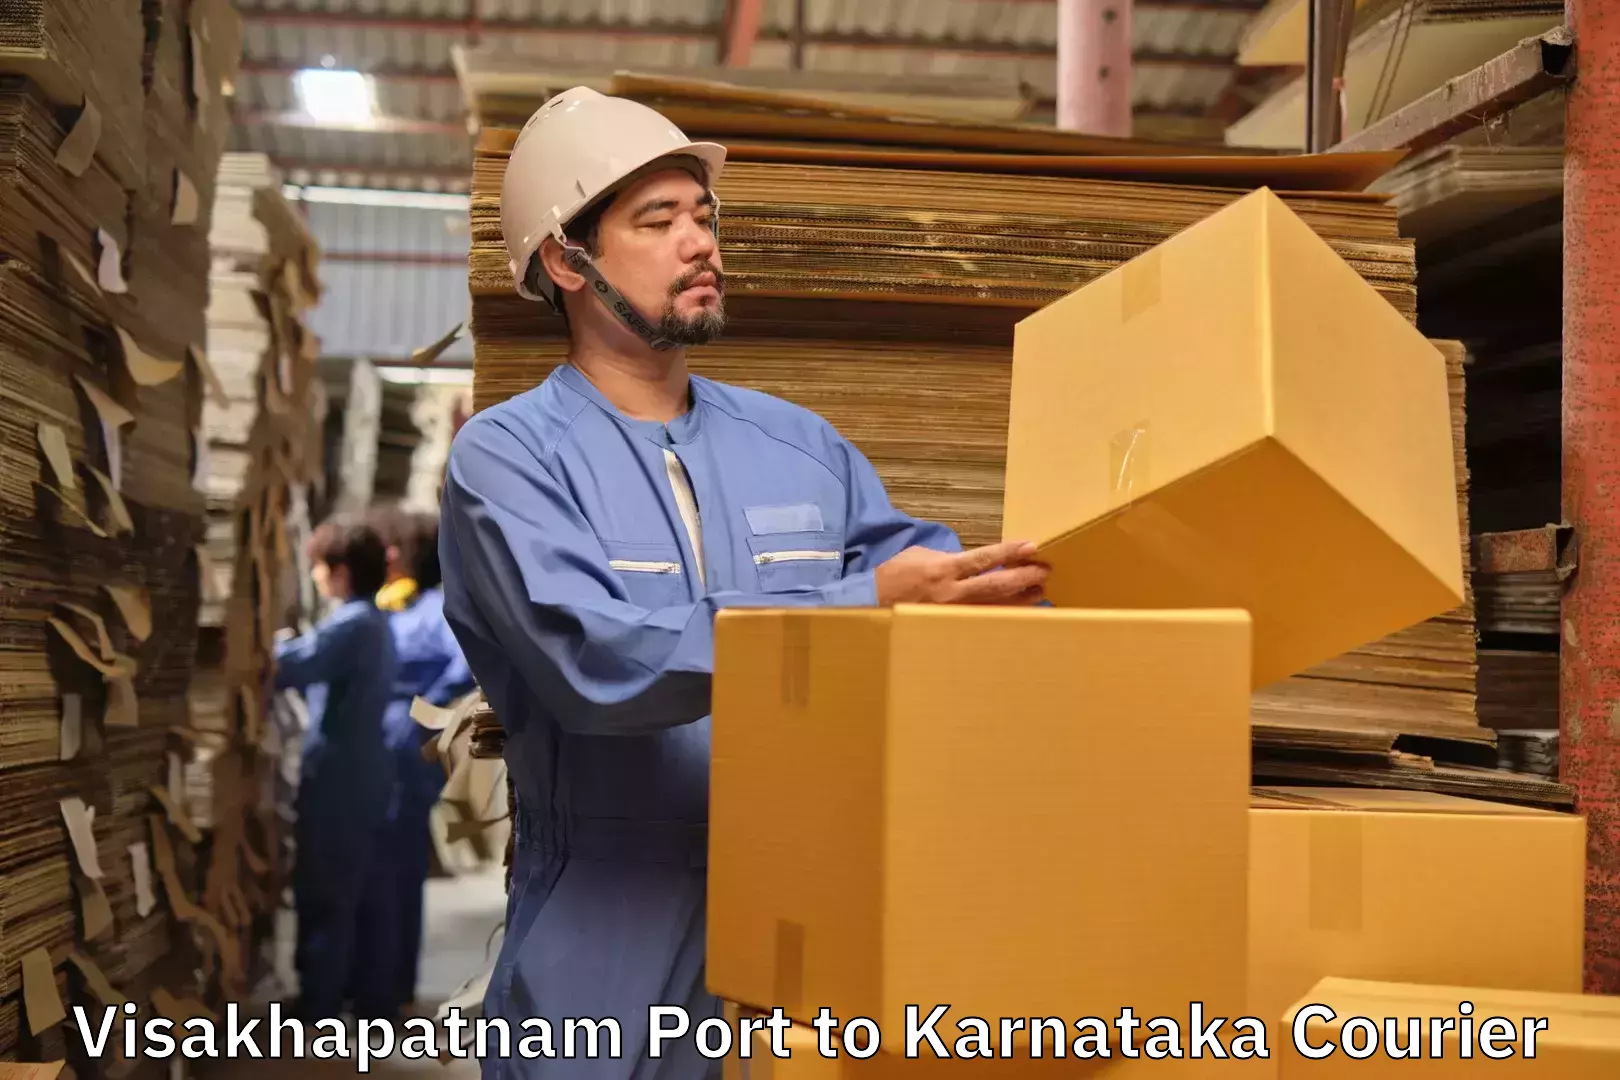 Luggage storage and delivery in Visakhapatnam Port to Manipal Academy of Higher Education